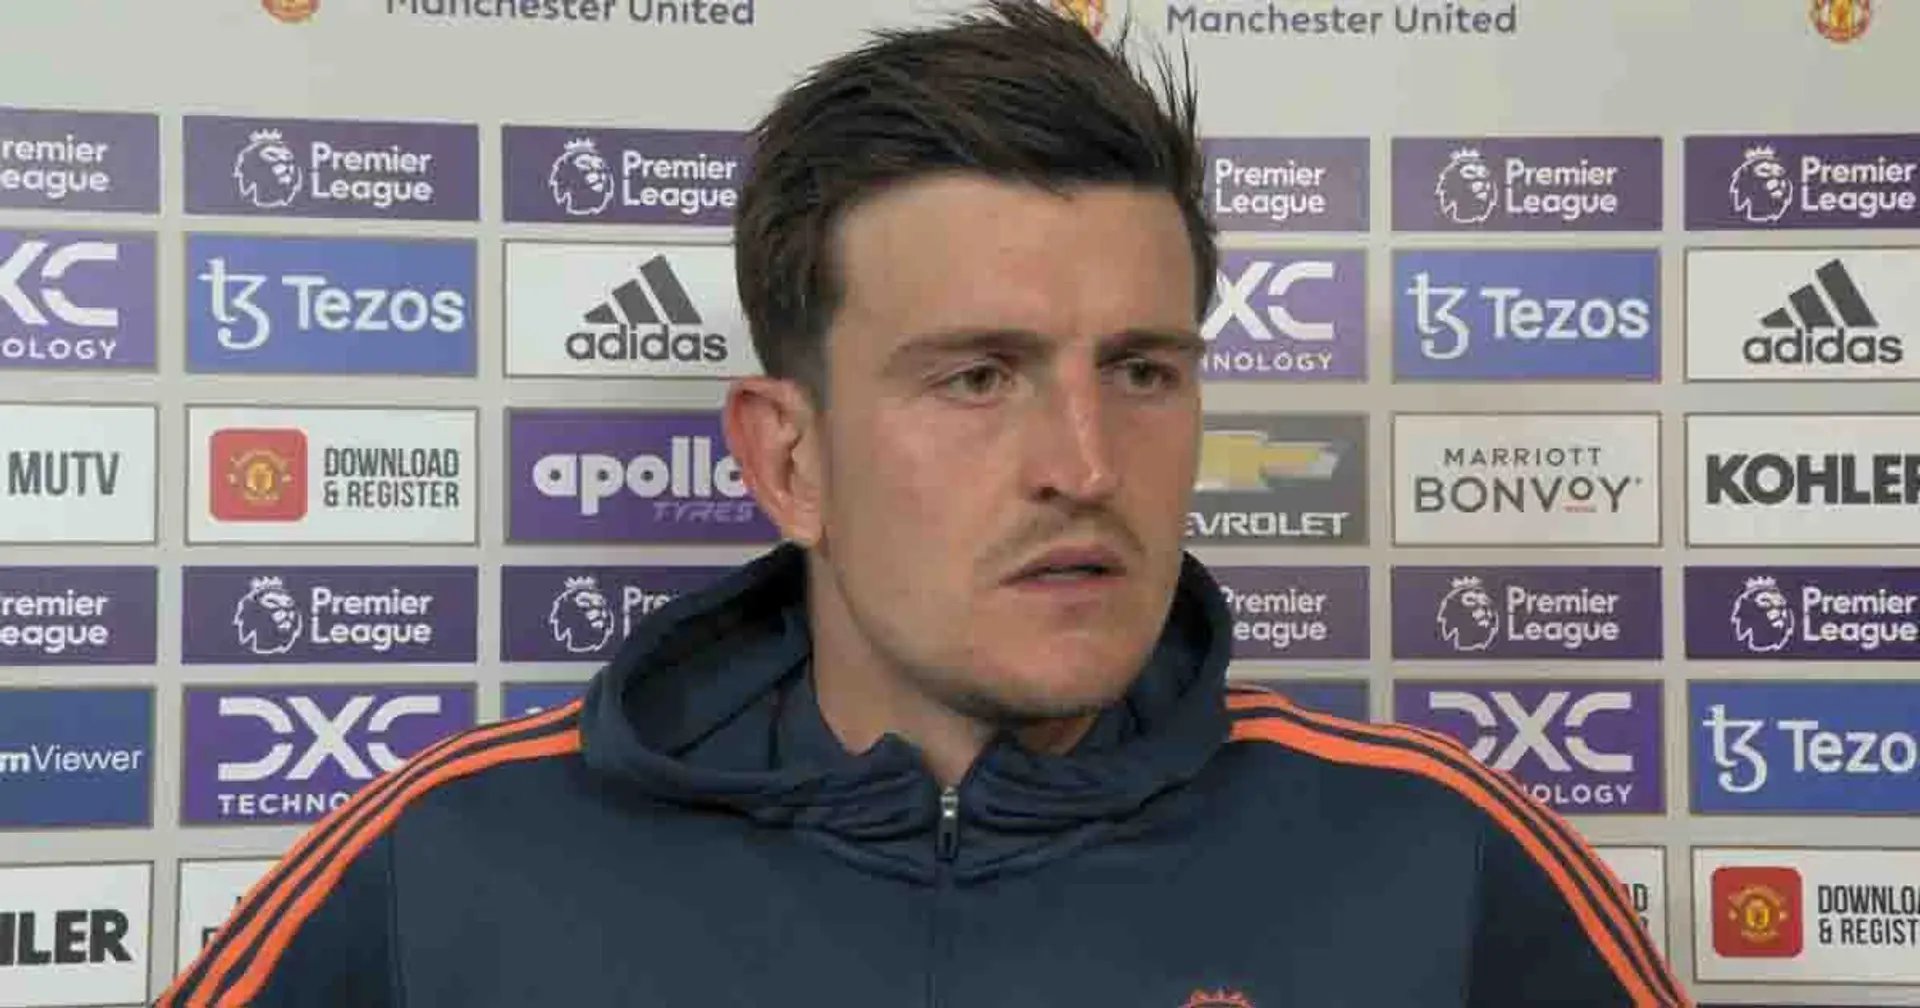 'There will be some unhappy being sat on the bench': Maguire opens up on United future amid lack of starts